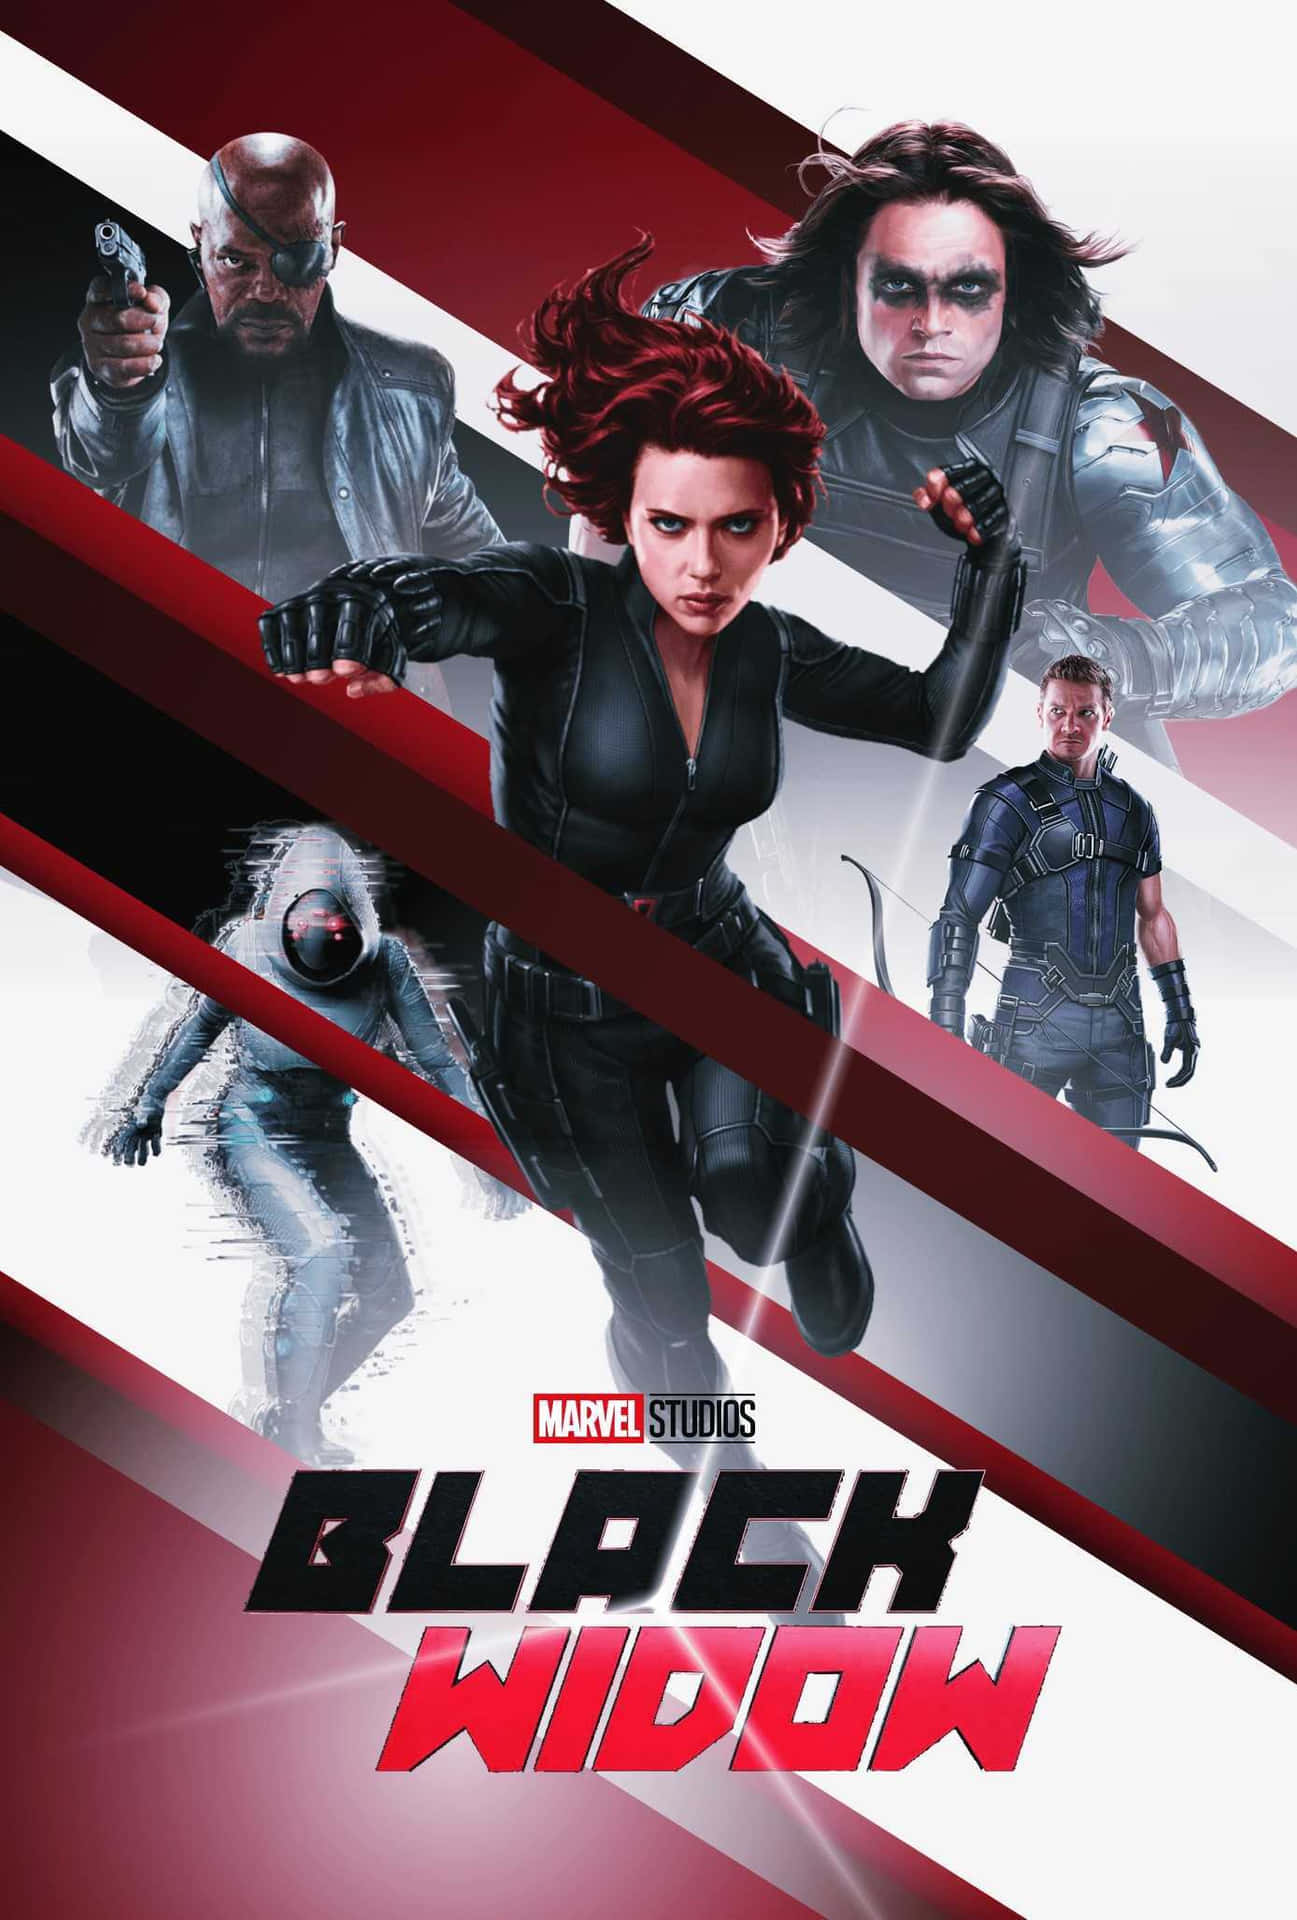 Get the power of Black Widow in this advanced iPhone Wallpaper